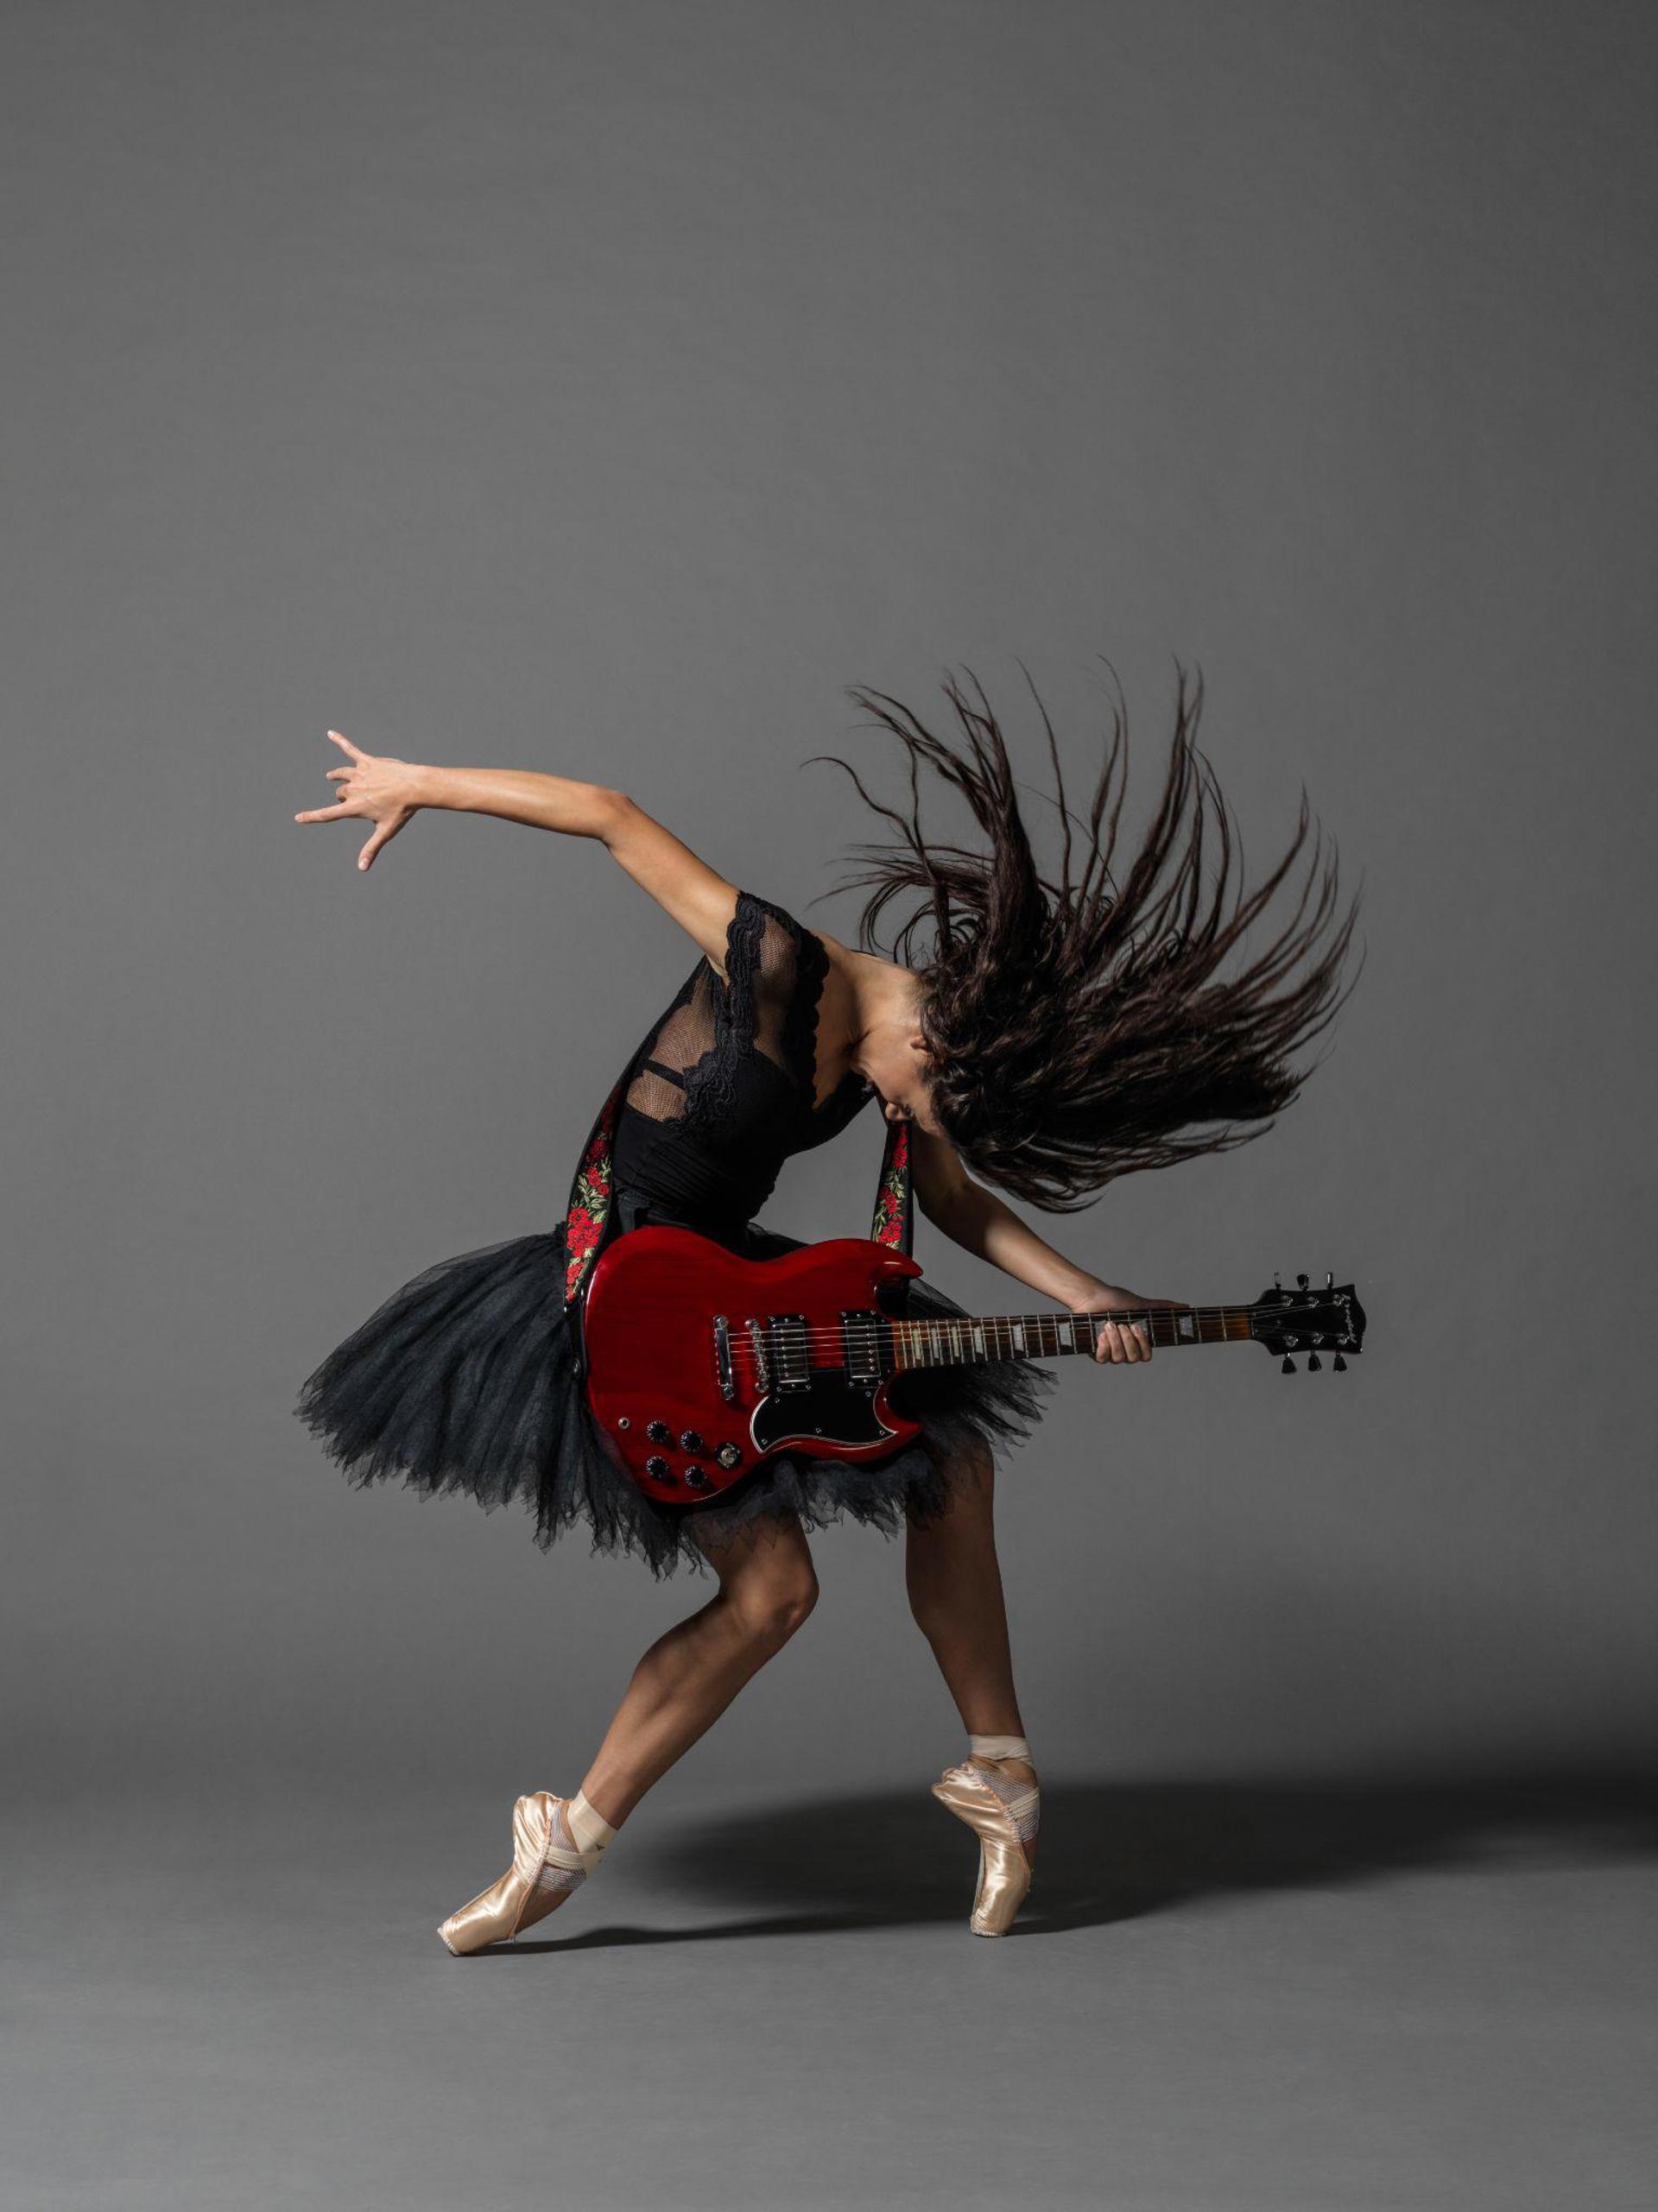 female dancer on point with bended knees, holding a guitar arching over it, with one hand flung behind and long brown hair flicked over the head